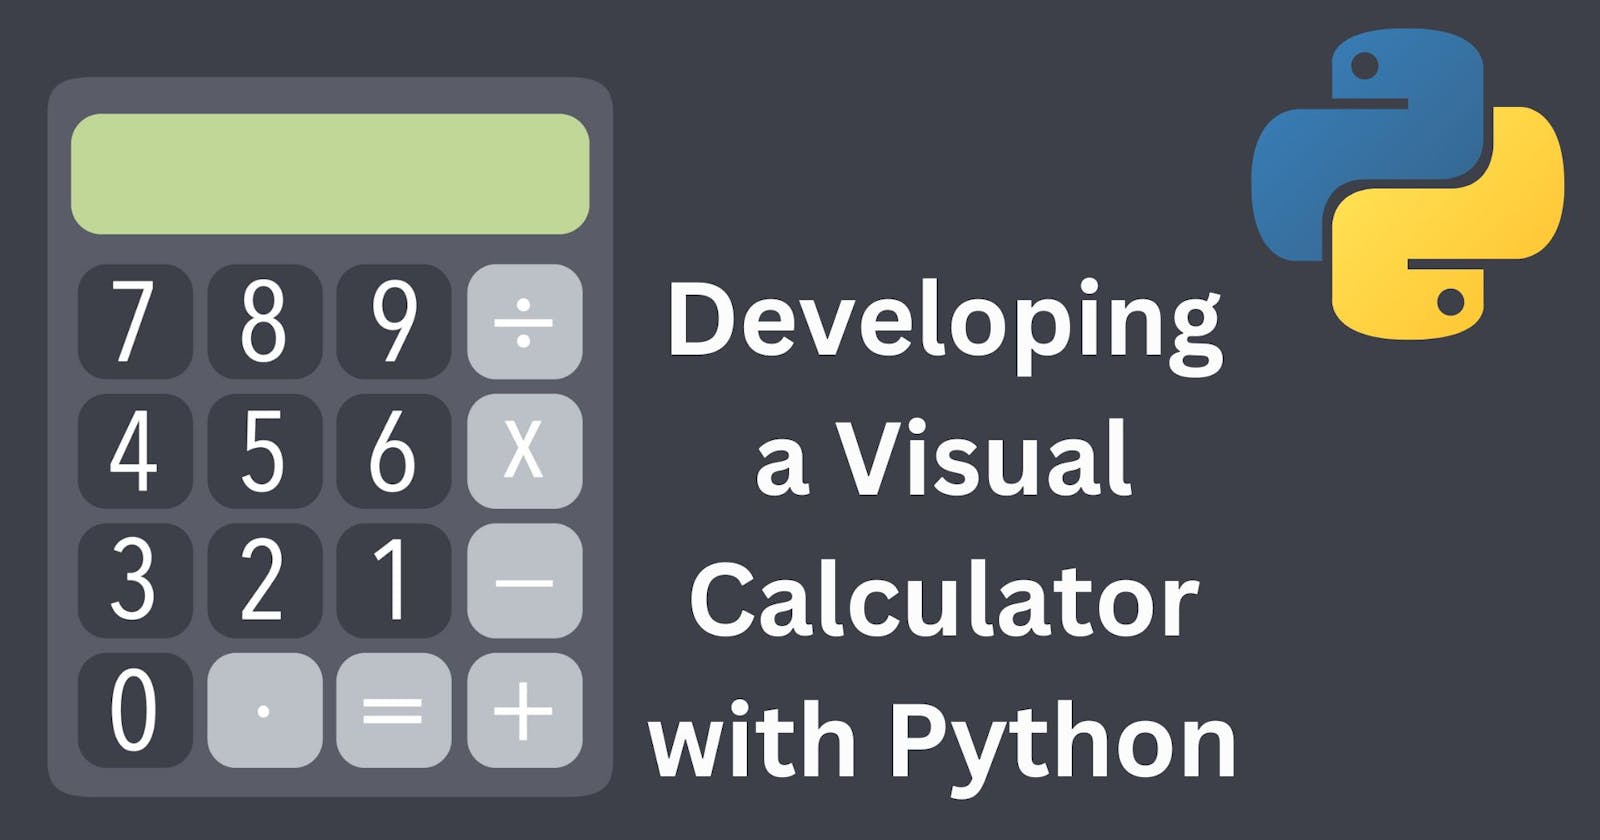 Developing a Visual Calculator with Python